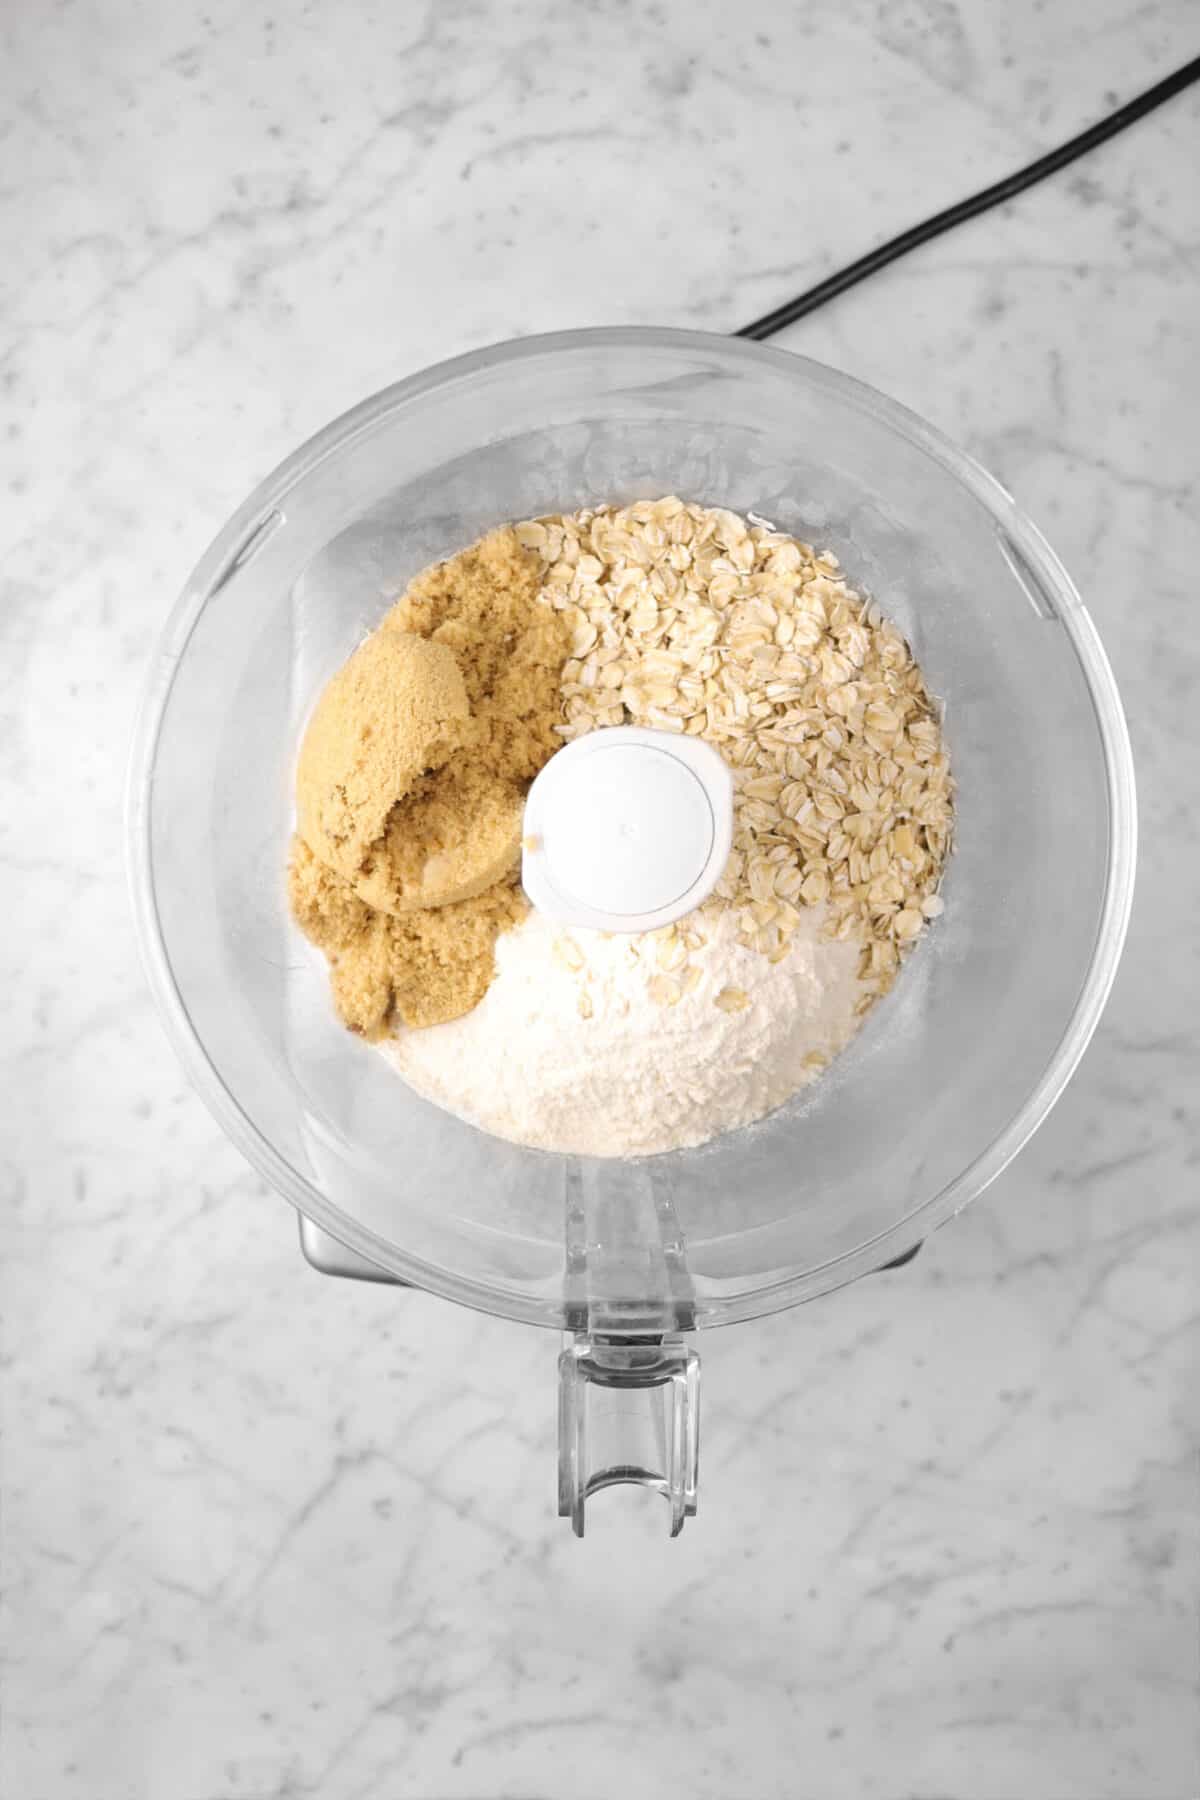 oats, flour, and brown sugar in a food processor